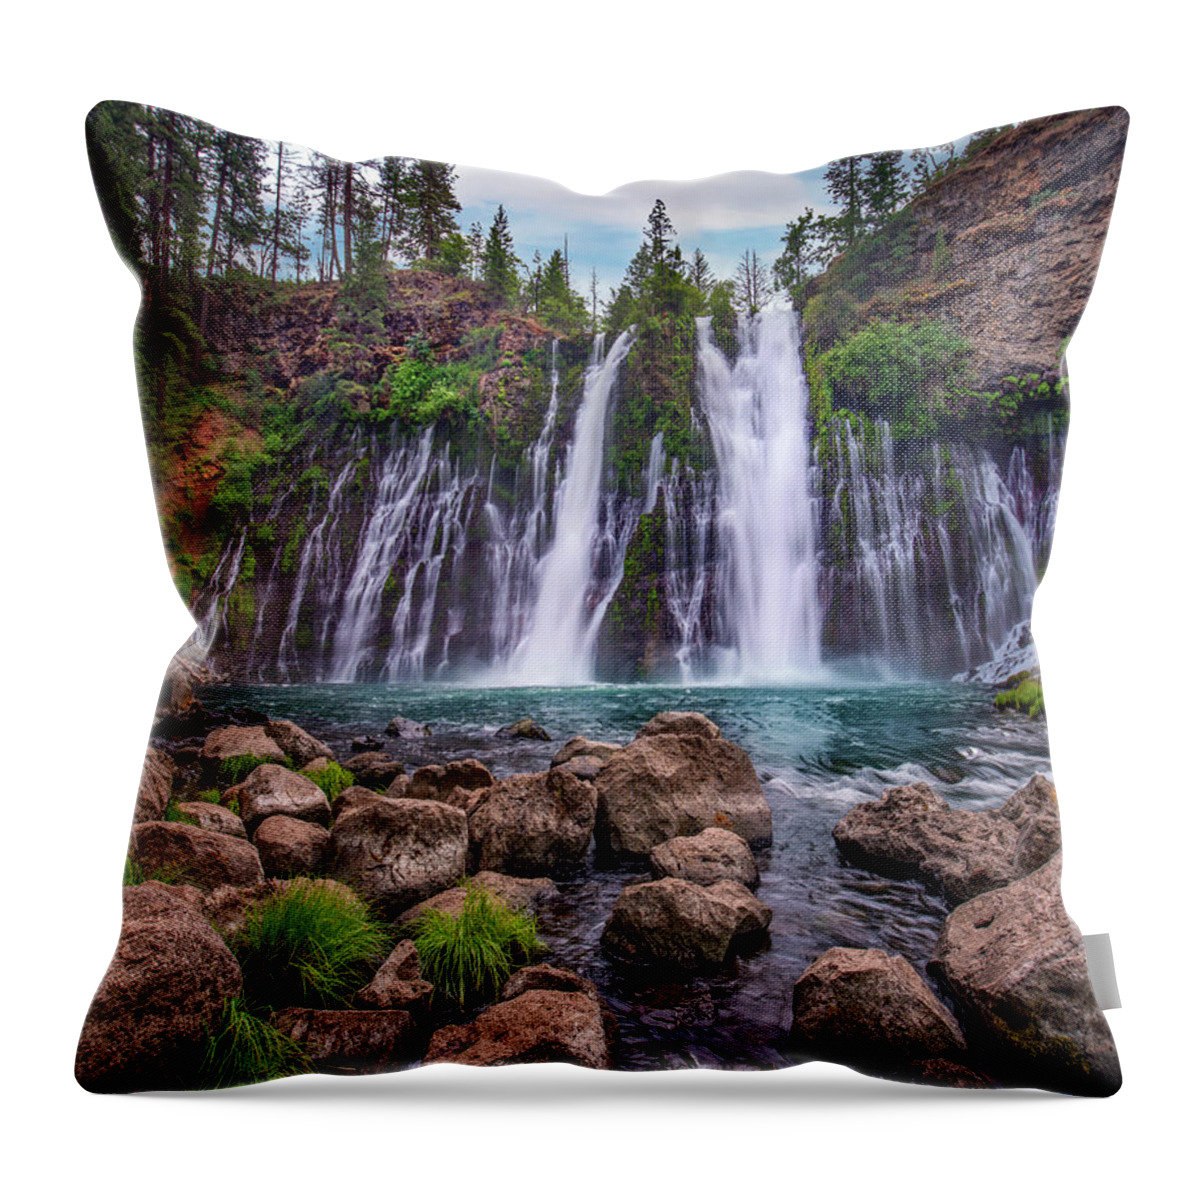 00571588 Throw Pillow featuring the photograph Waterfall, Mcarthur-burney Falls Memorial State Park, California #6 by Tim Fitzharris